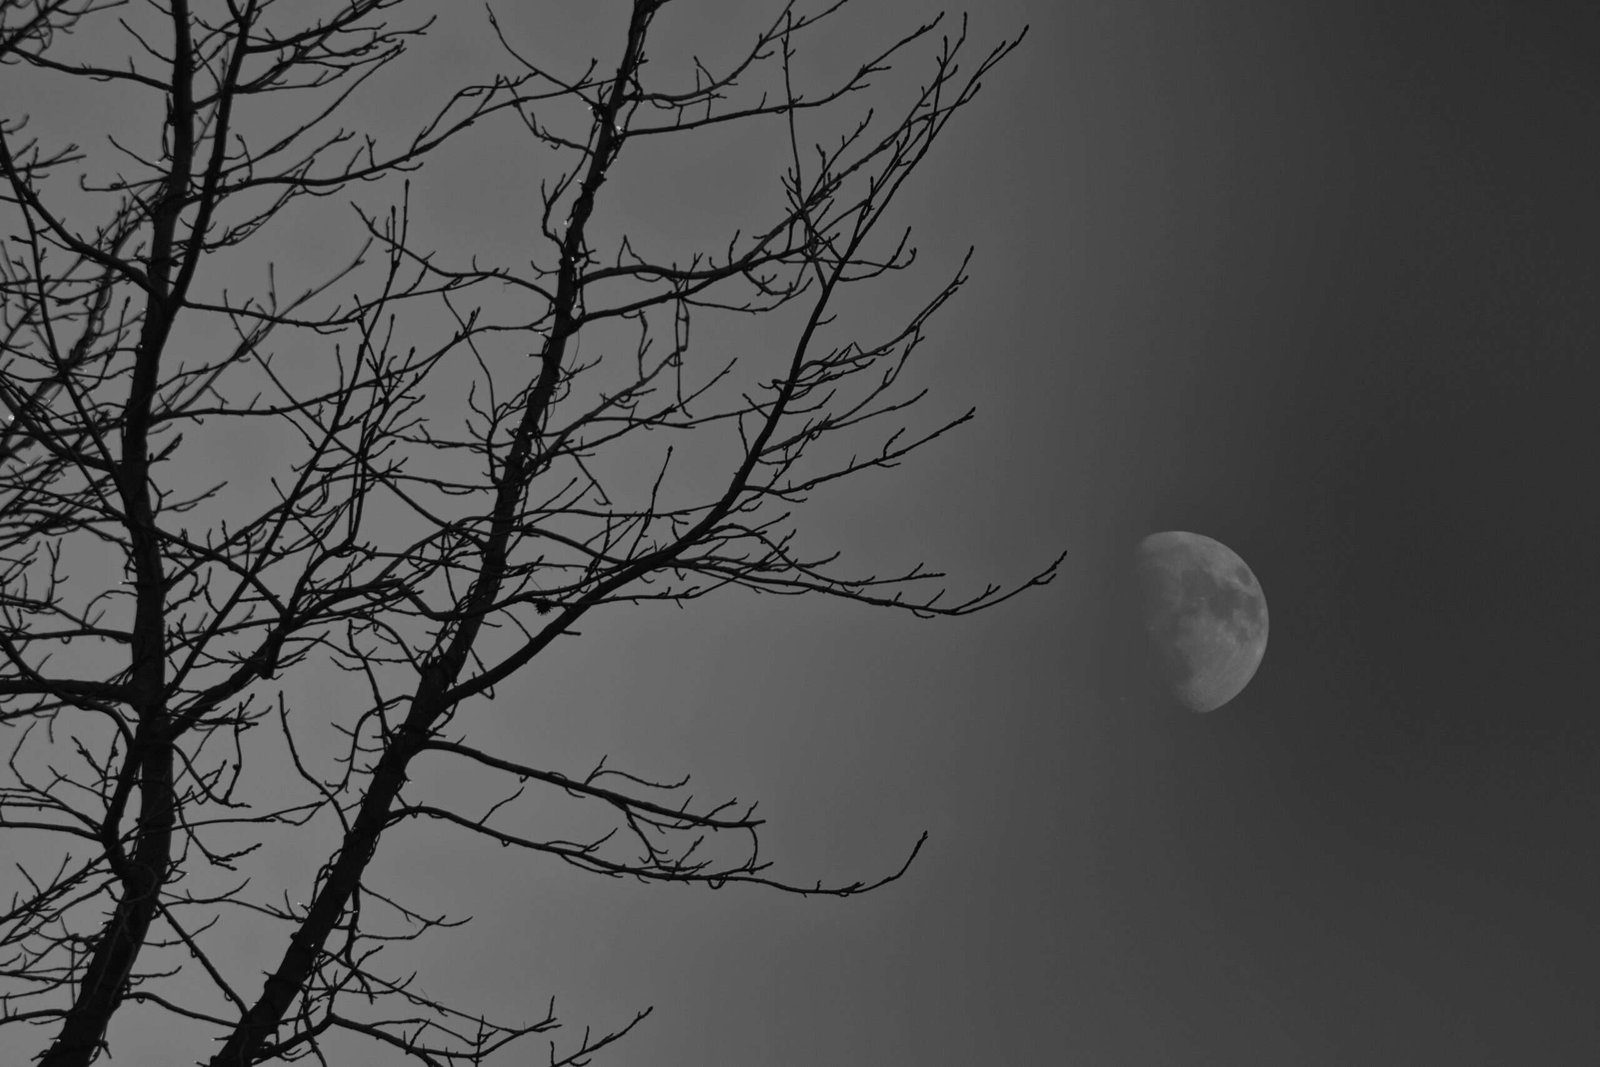 On a clear morning, Ghost photographed the moon in a somewhat unusual frame.